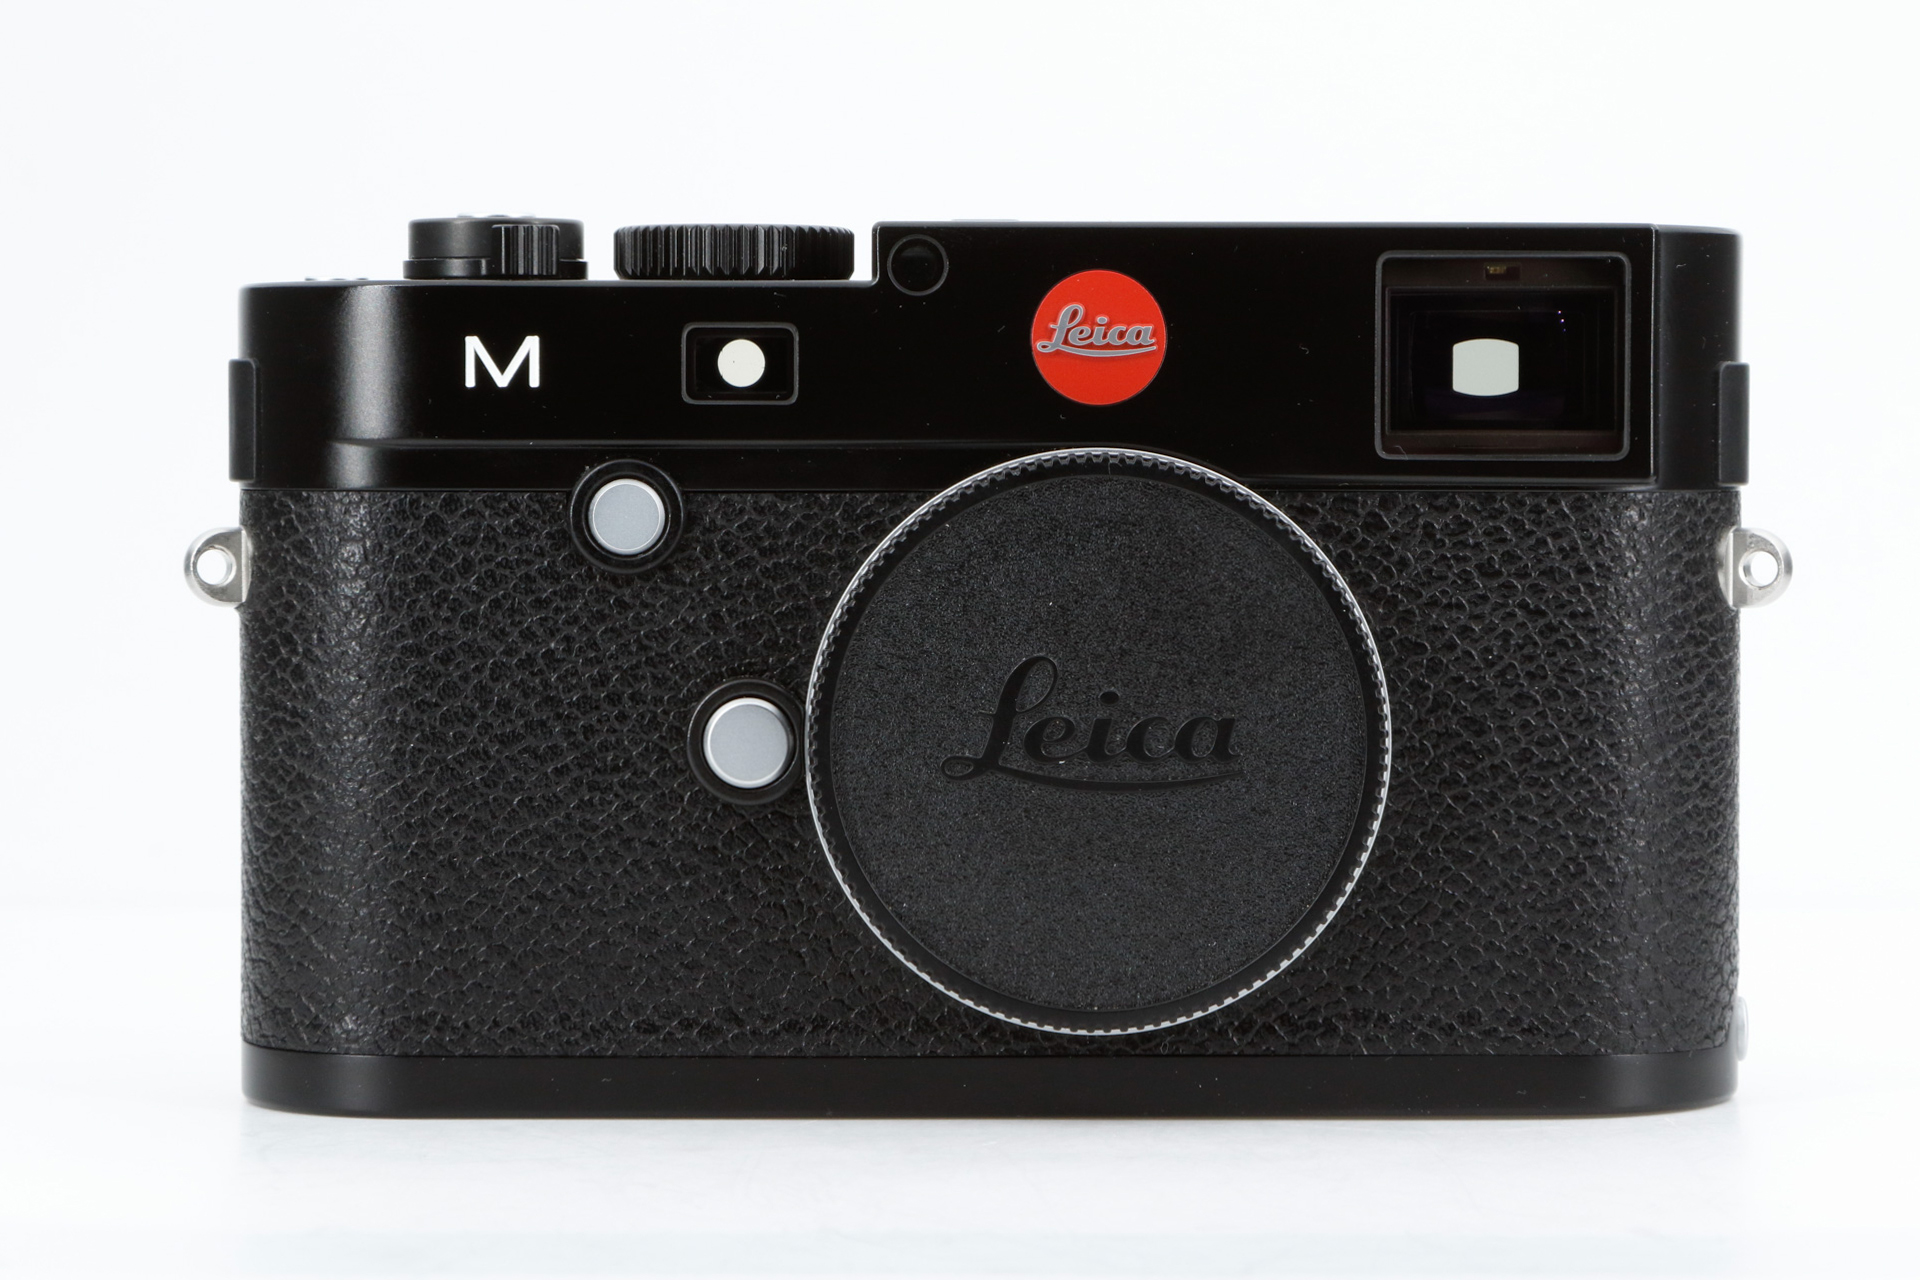 LEICA M (Typ 240), black with handgrip and original packaging